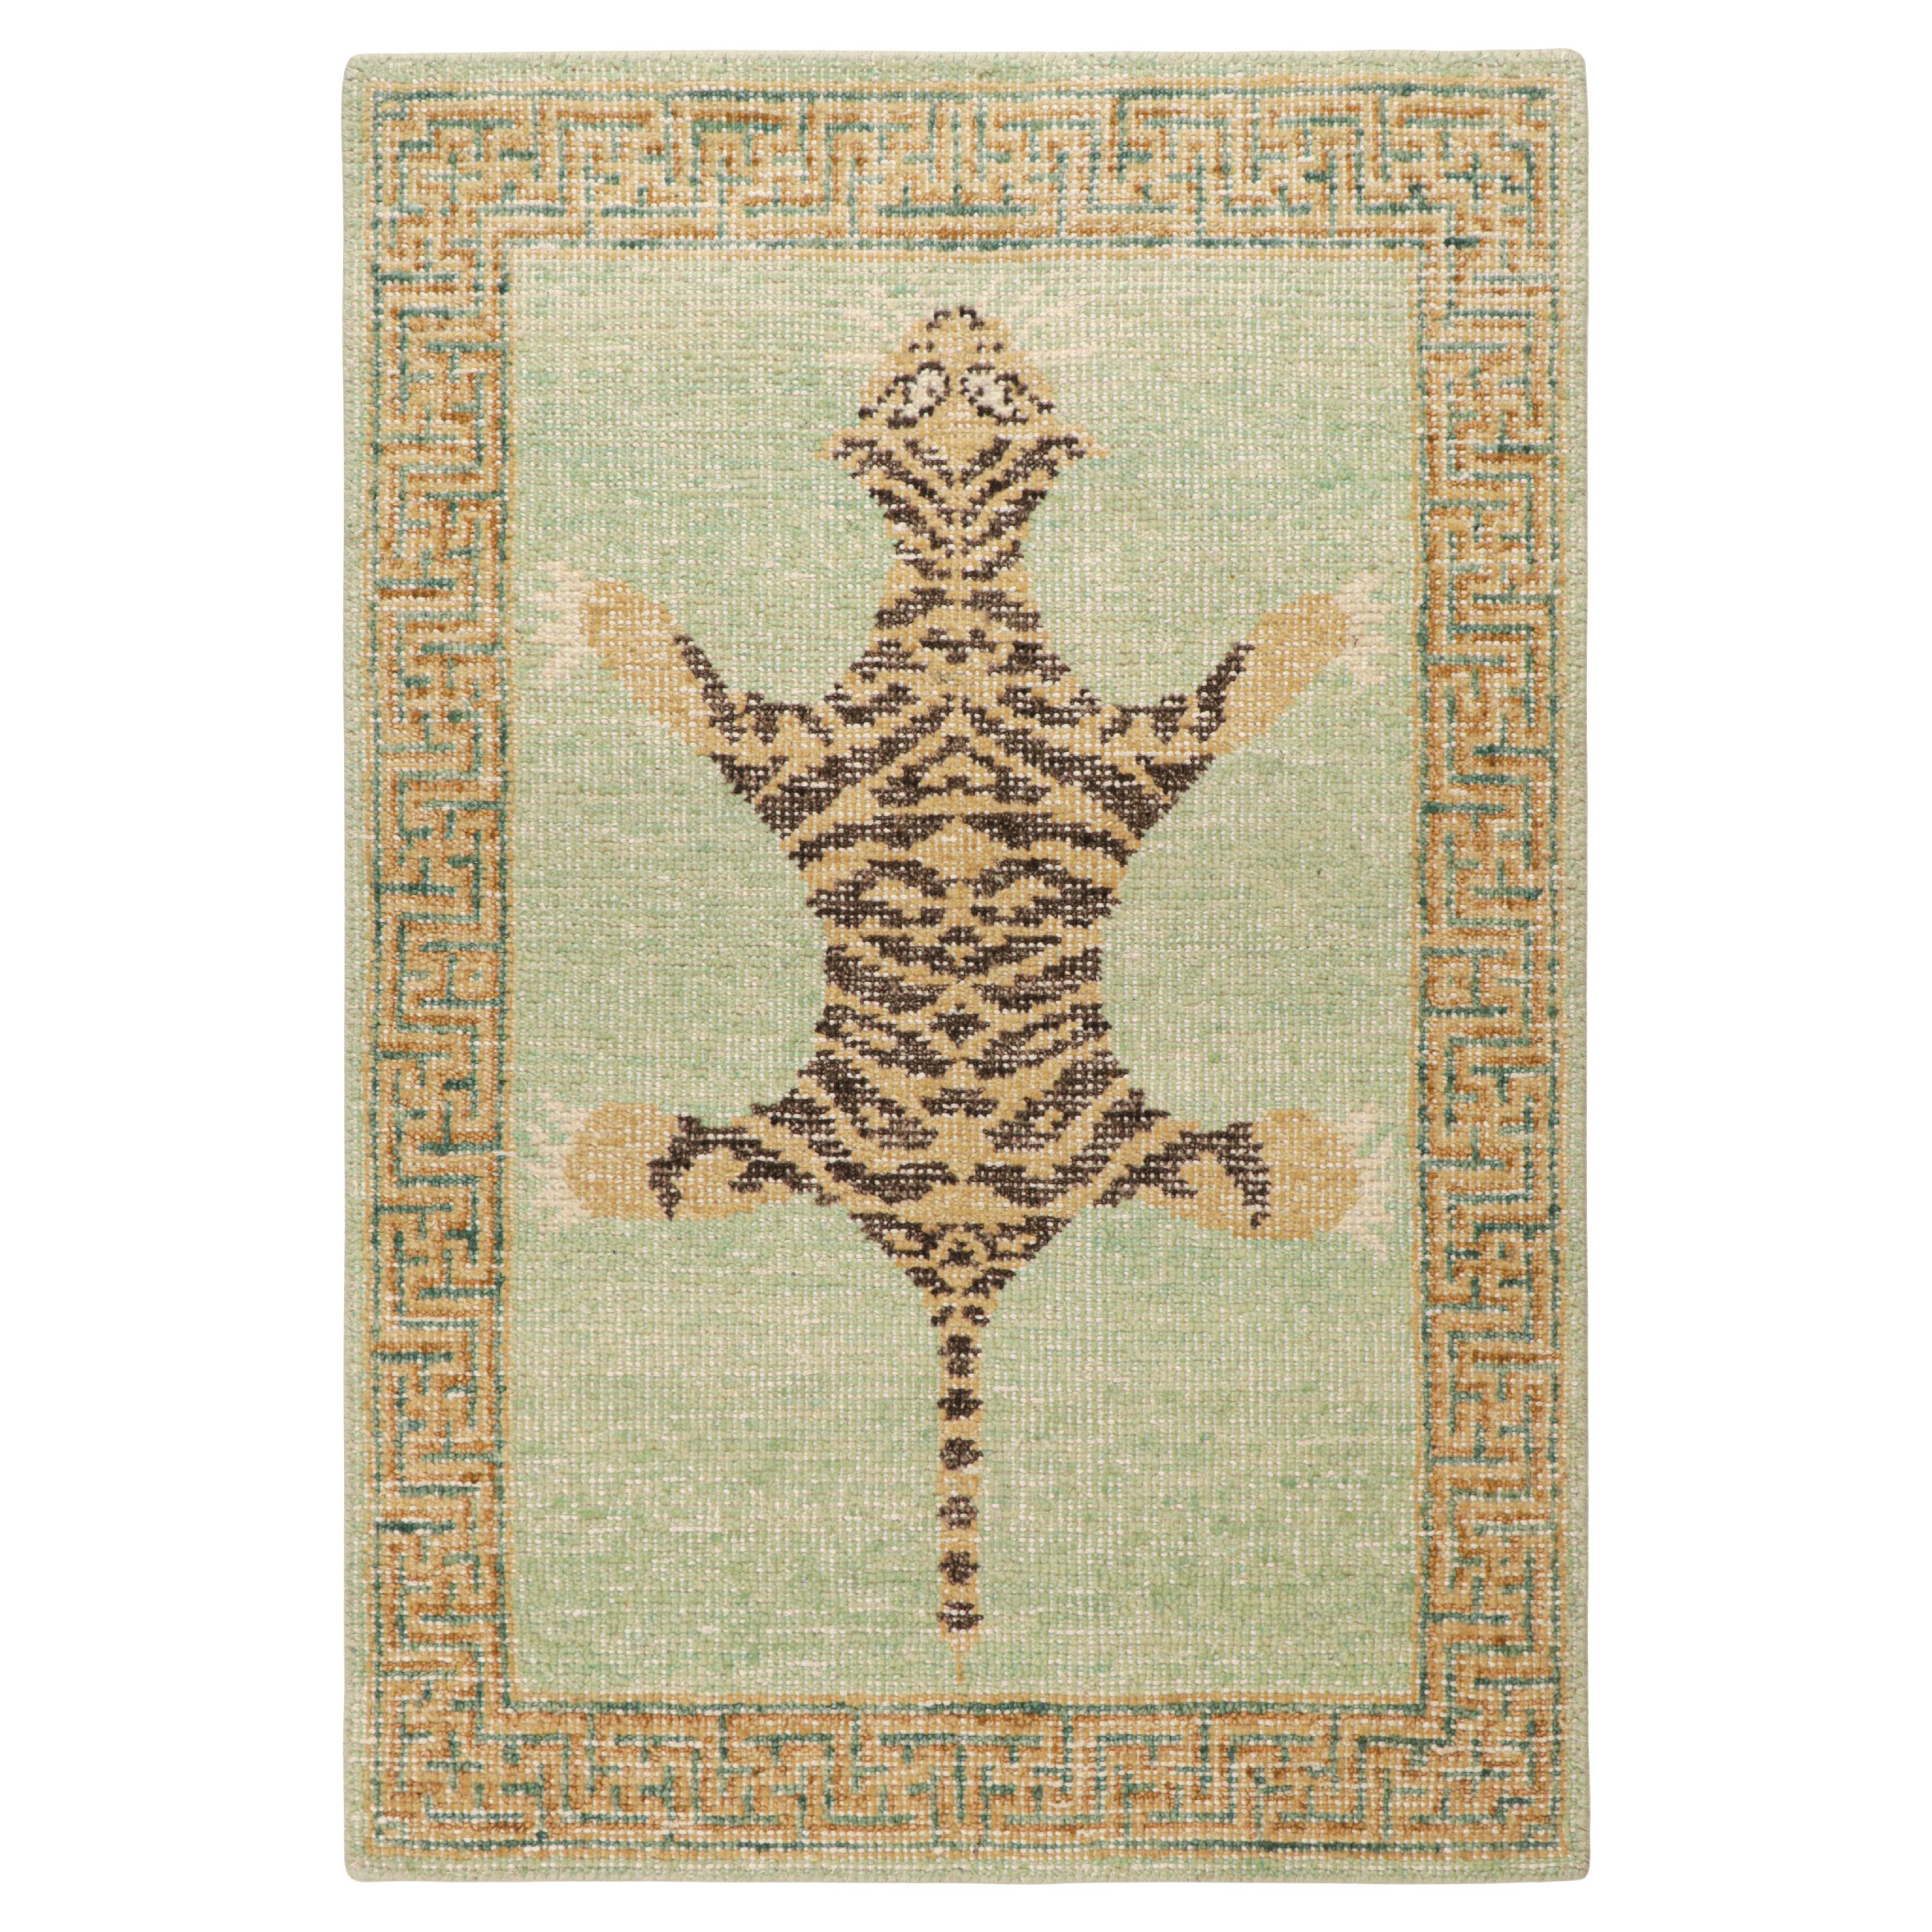 Rug & Kilim’s Modern Tiger Skin Accent Pictorial Rug in Green, Beige and Black